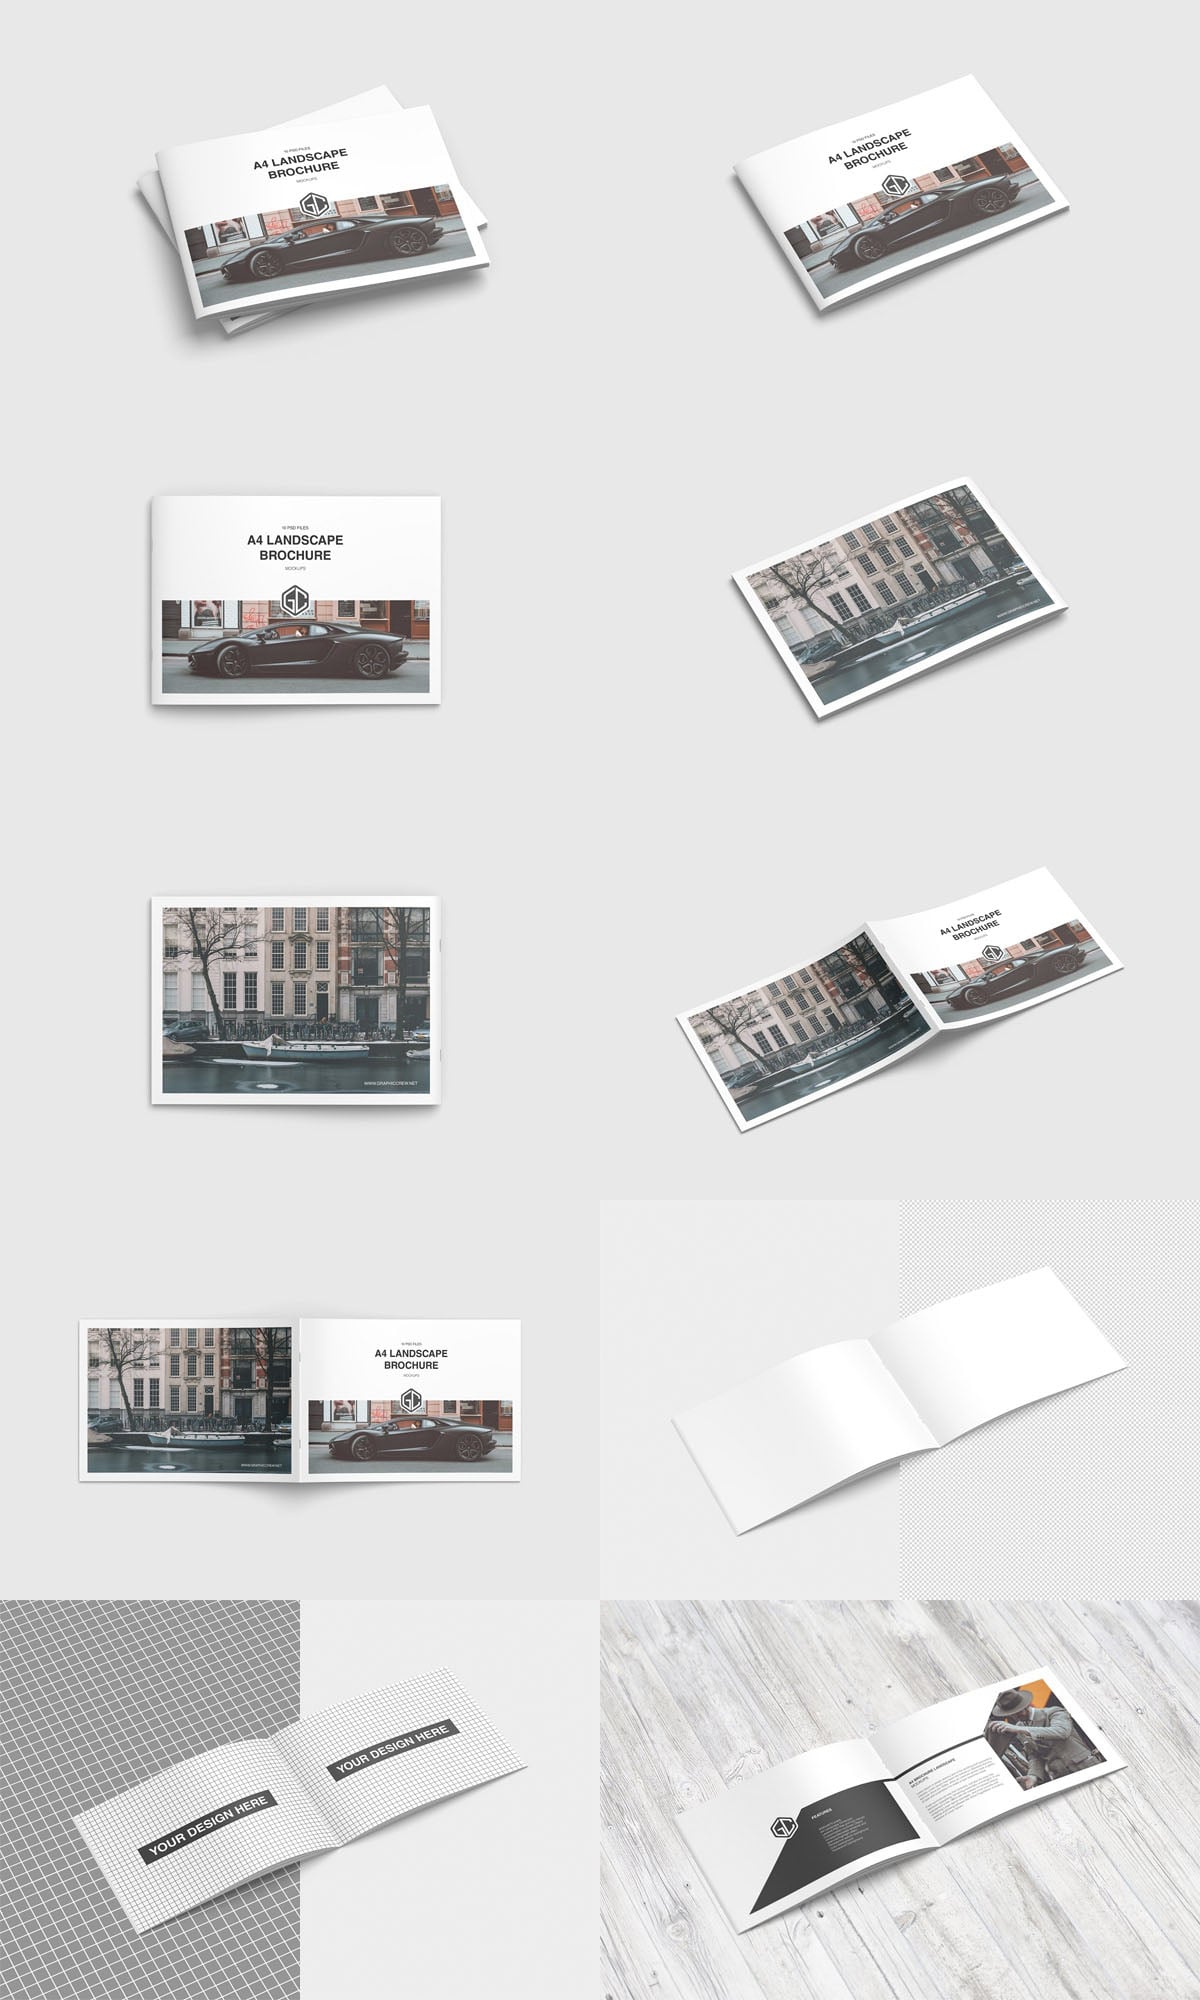 Download A4 Landscape Brochure Mockup - Find the Perfect Creative Mockups Freebies to Showcase your ...